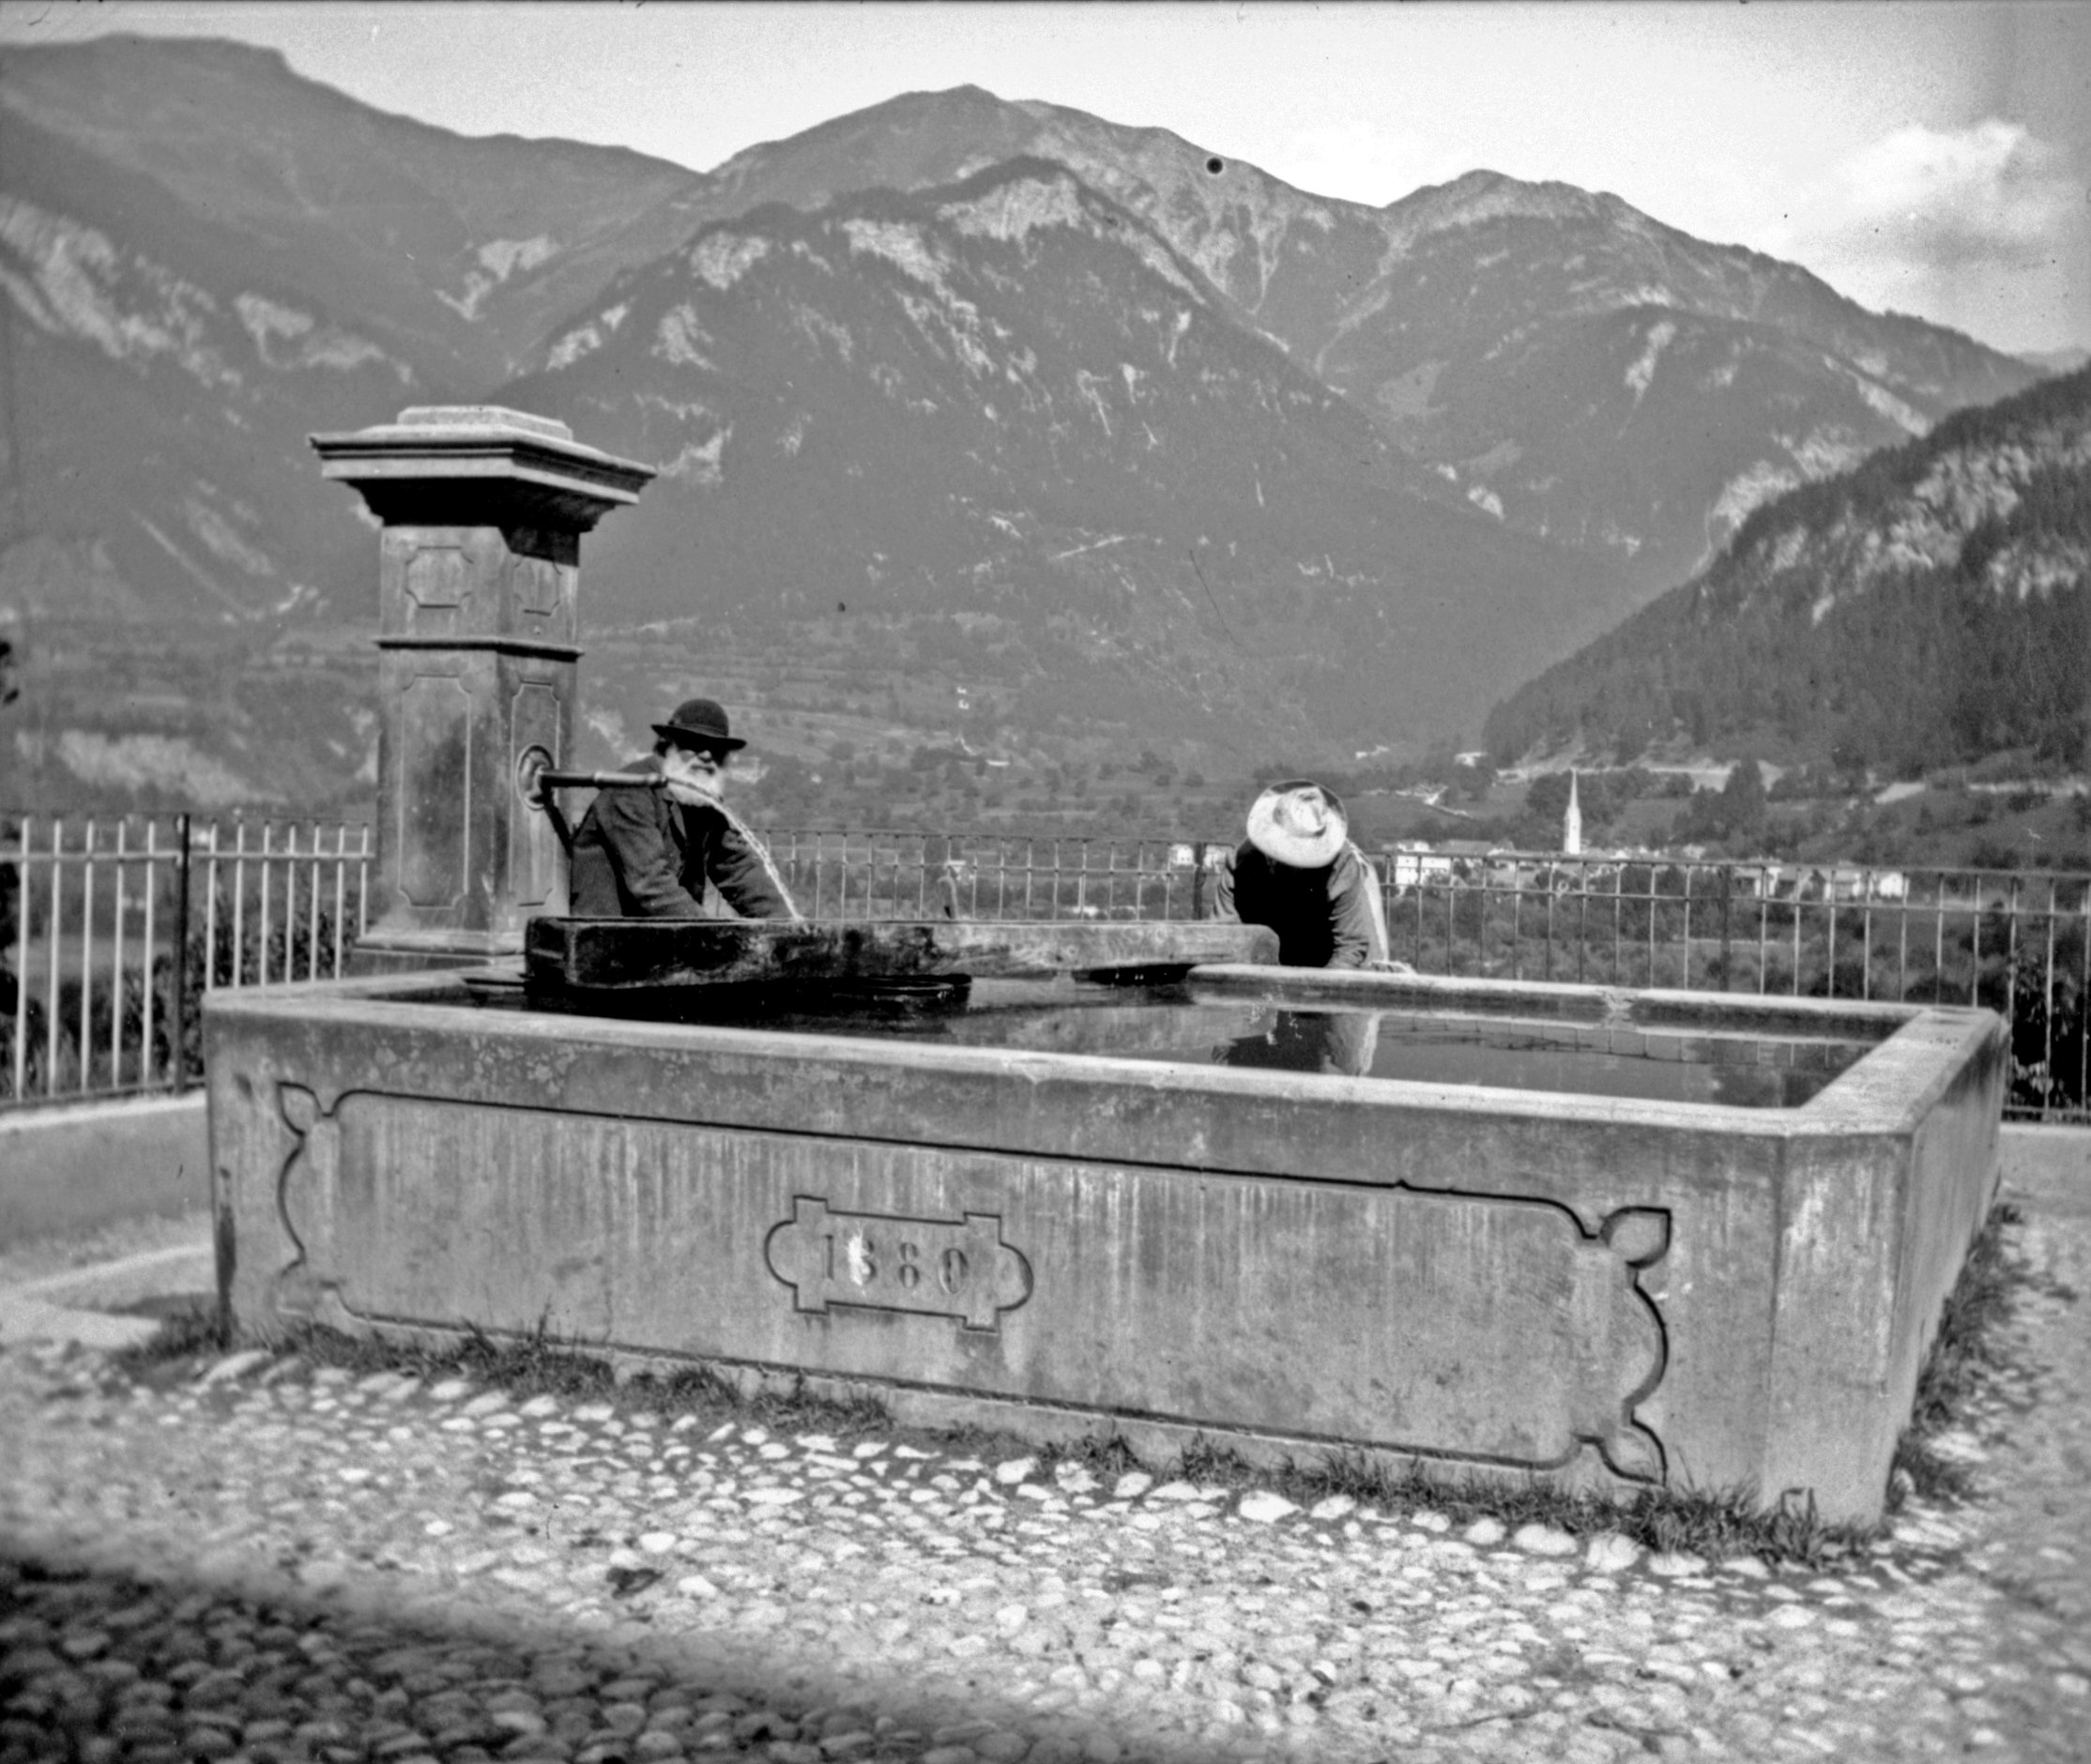 Waschbrunnen in Thusis (Sommer 1901), 87068 sn R_o (DRM CC BY-NC-SA)